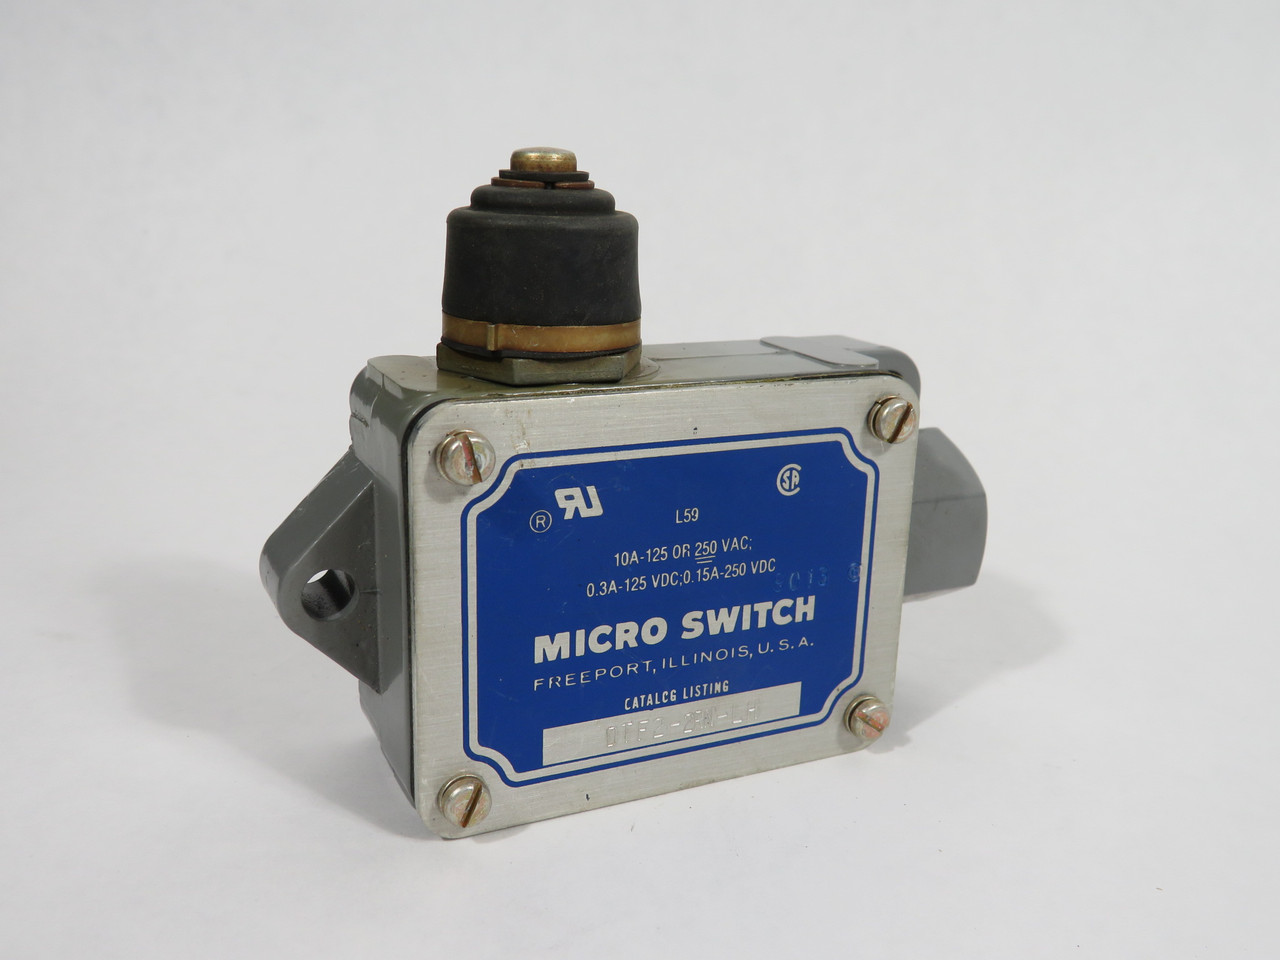 Microswitch DTF2-2RN-LH Limit Switch 10A 125/250VAC 0.3-0.15A 125-250VDC ! NOP !